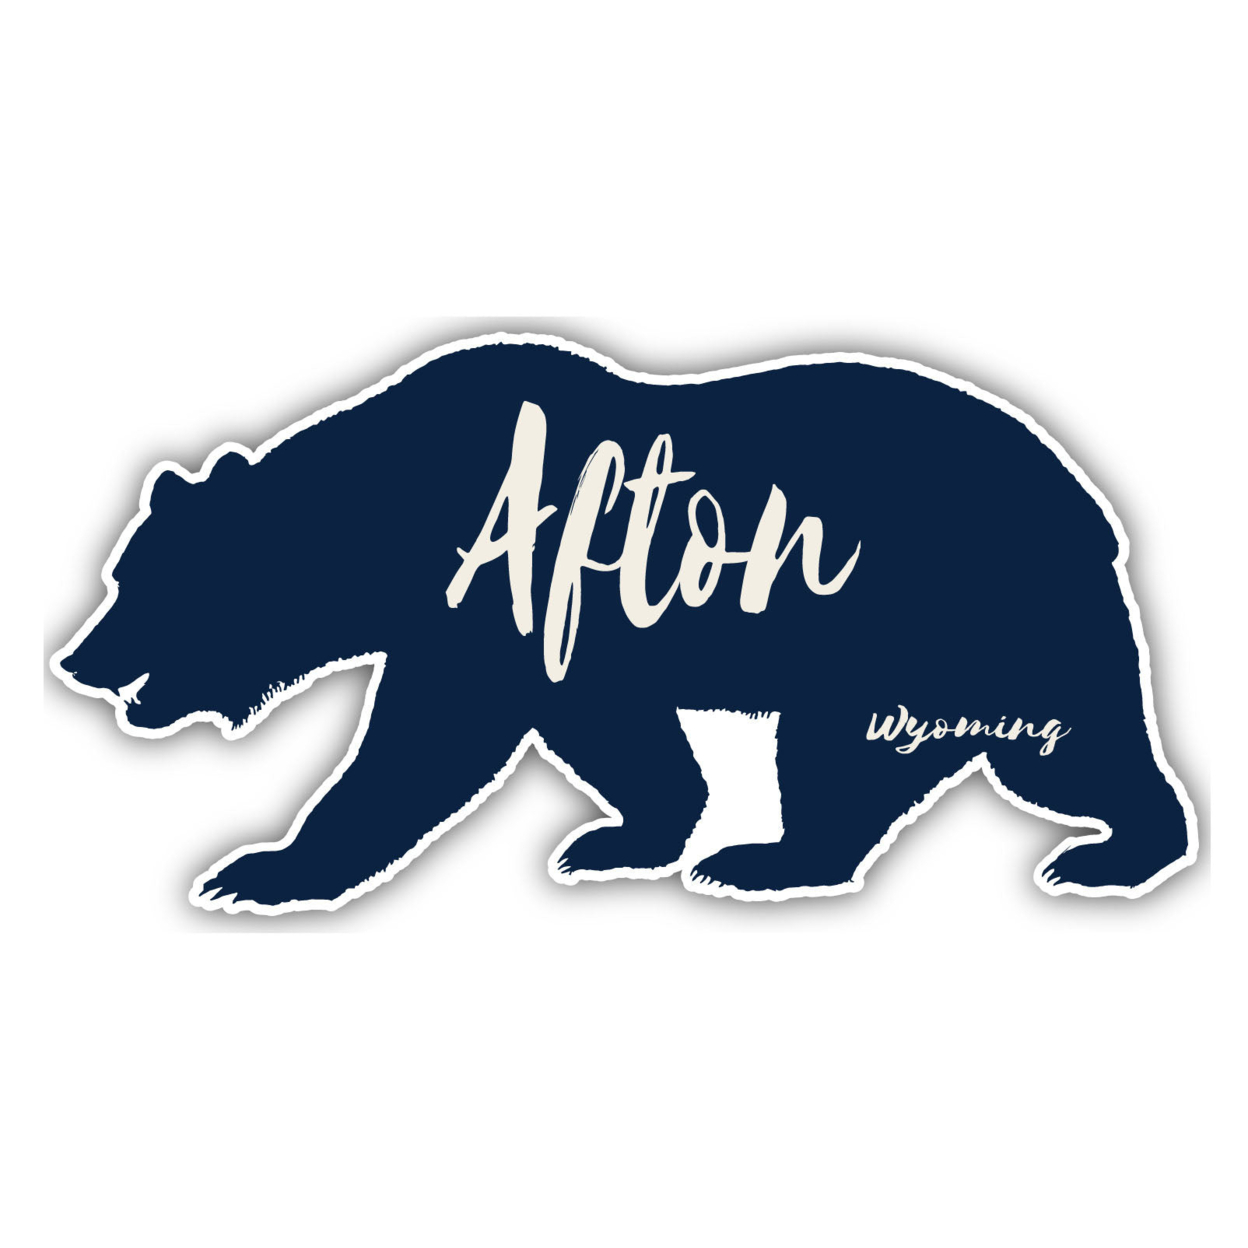 Afton Wyoming Souvenir Decorative Stickers (Choose Theme And Size) - Single Unit, 4-Inch, Bear